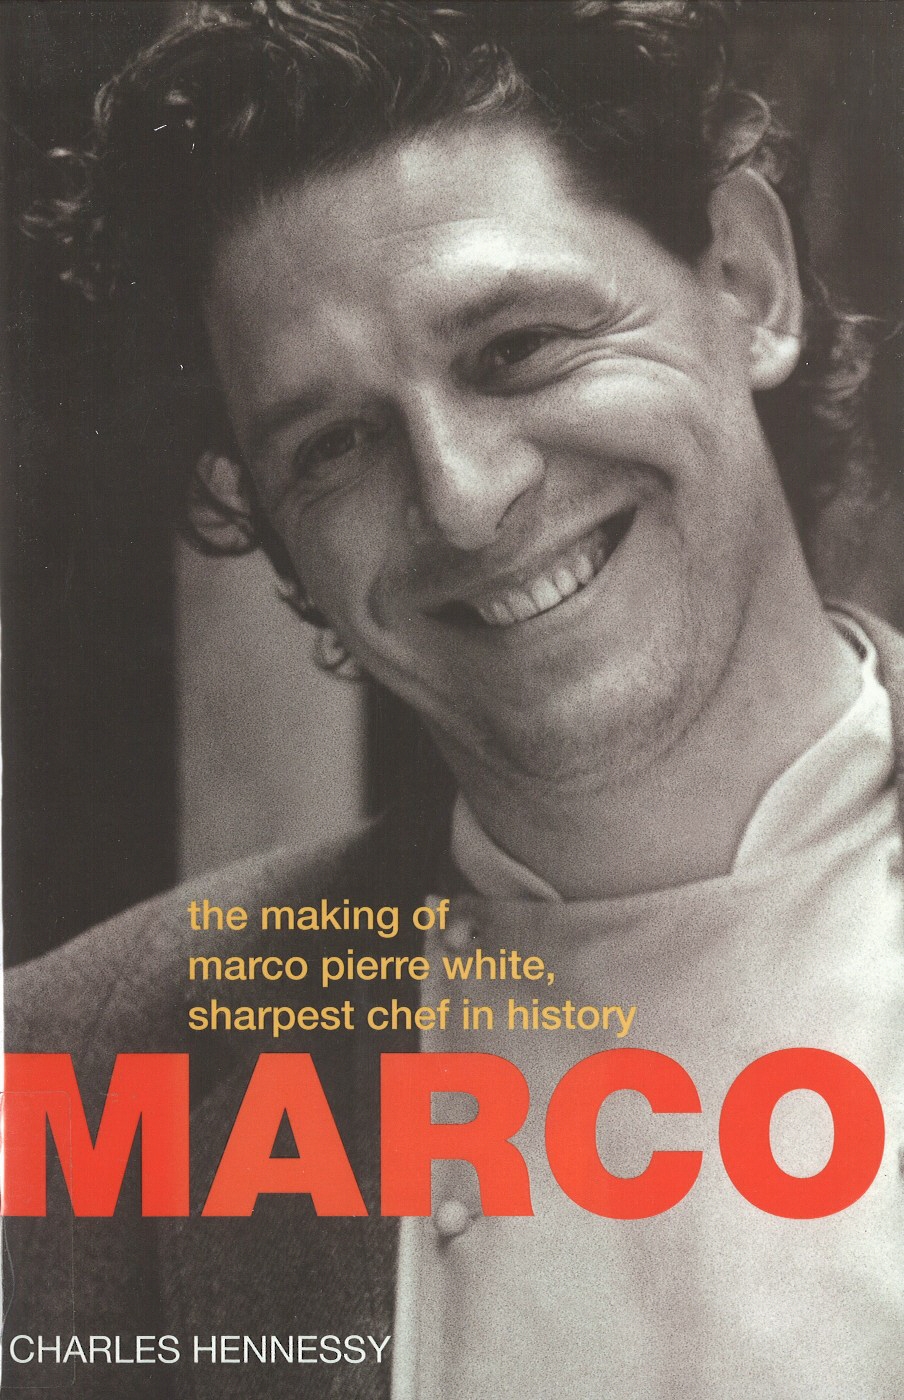 Marco Pierre White by Charles Hennessy - Penguin Books Australia